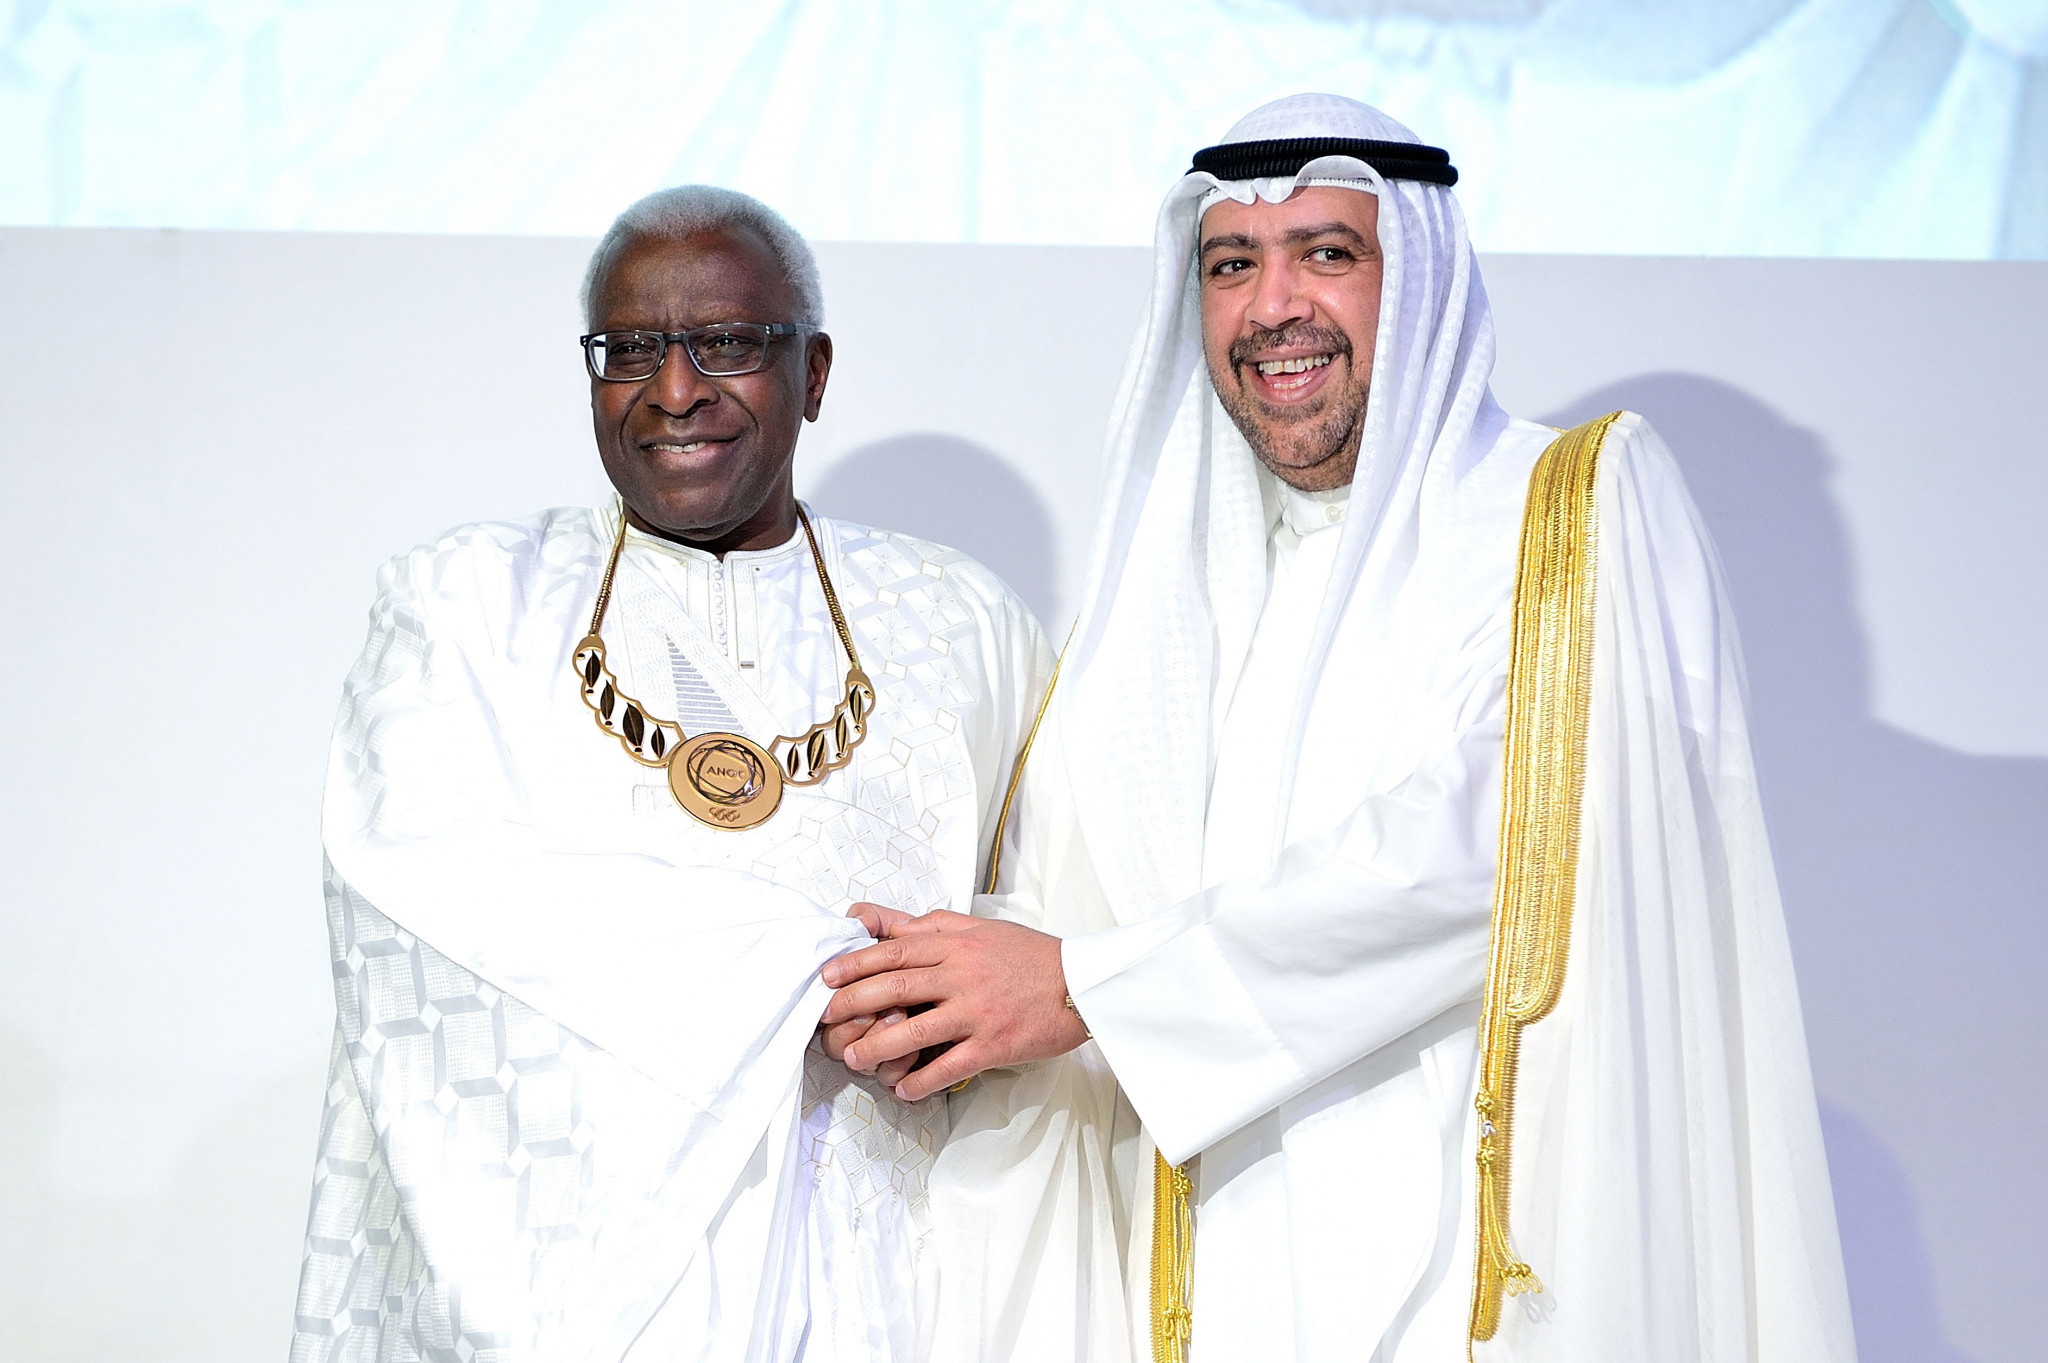 Lamine Diack, left, pictured with Sheikh Ahmad at the 2014 ANOC General Assembly in Bangkok ©Getty Images